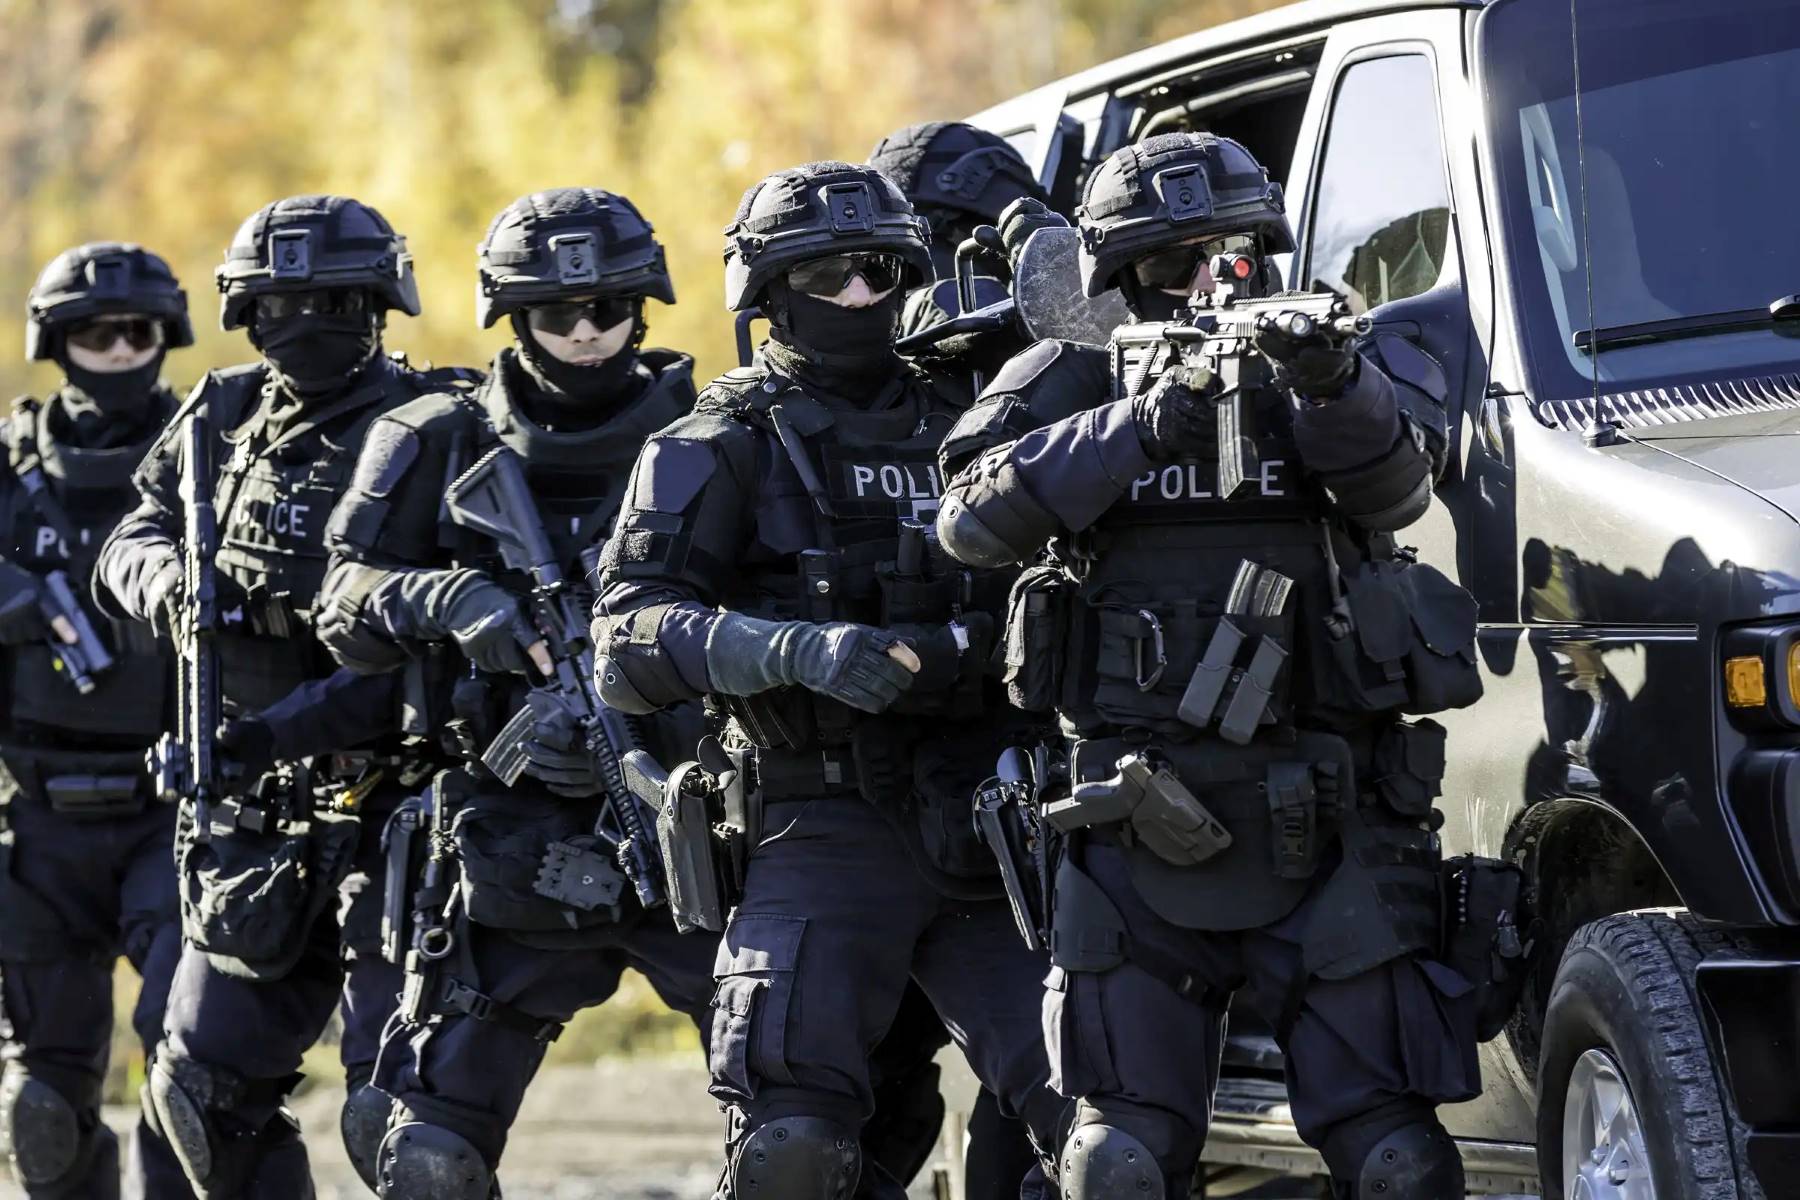 Special Weapons And Tactics (SWAT) Team - Specialized Units